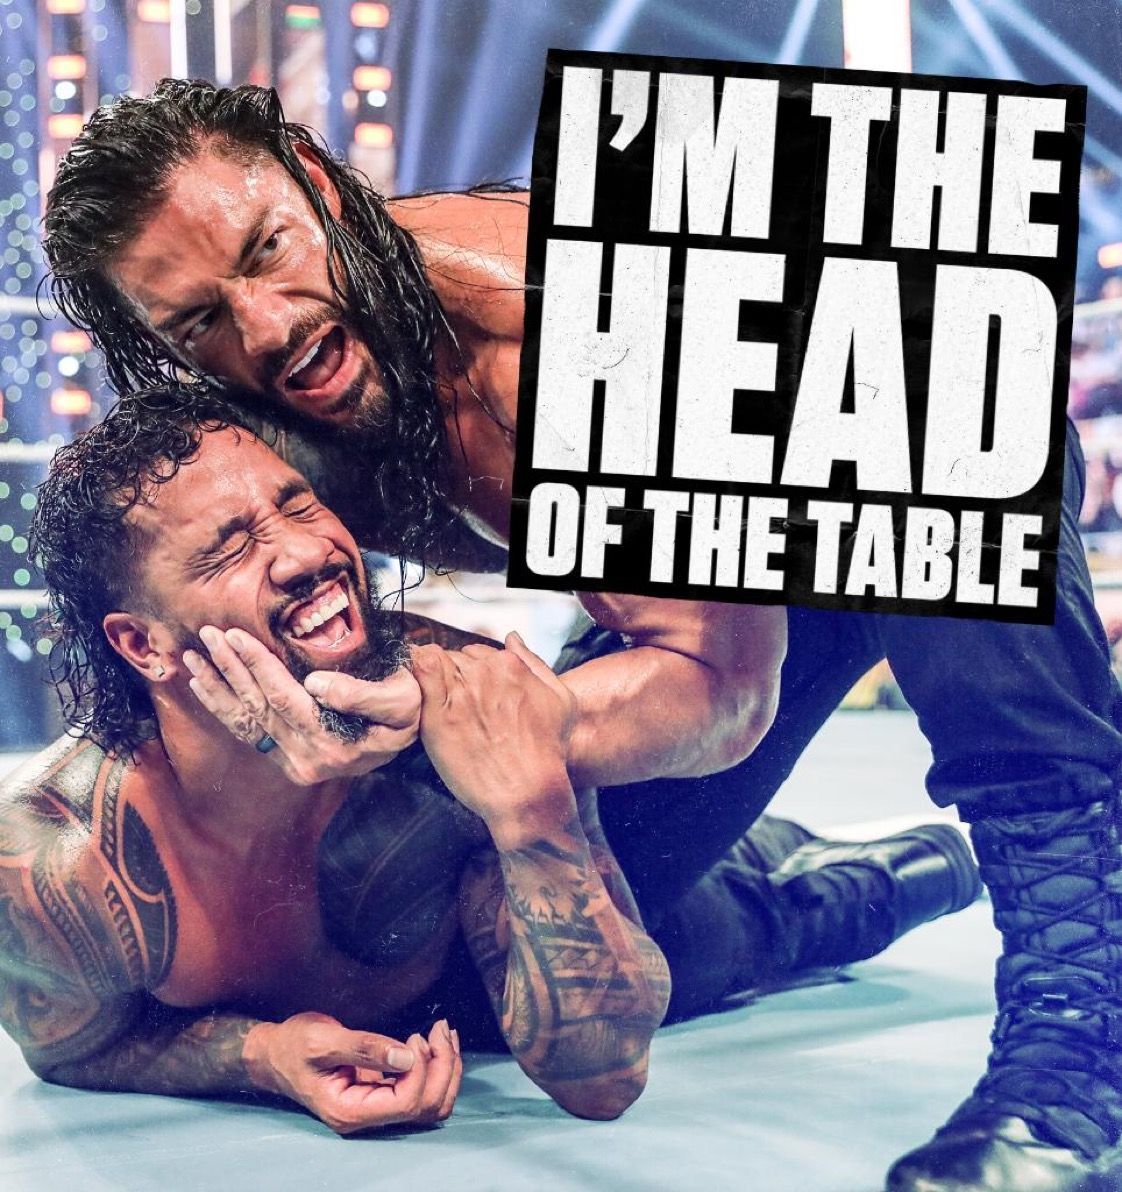 Roman is at the head of the table. Roman reigns, Wwe roman reigns, Eddie guerrero